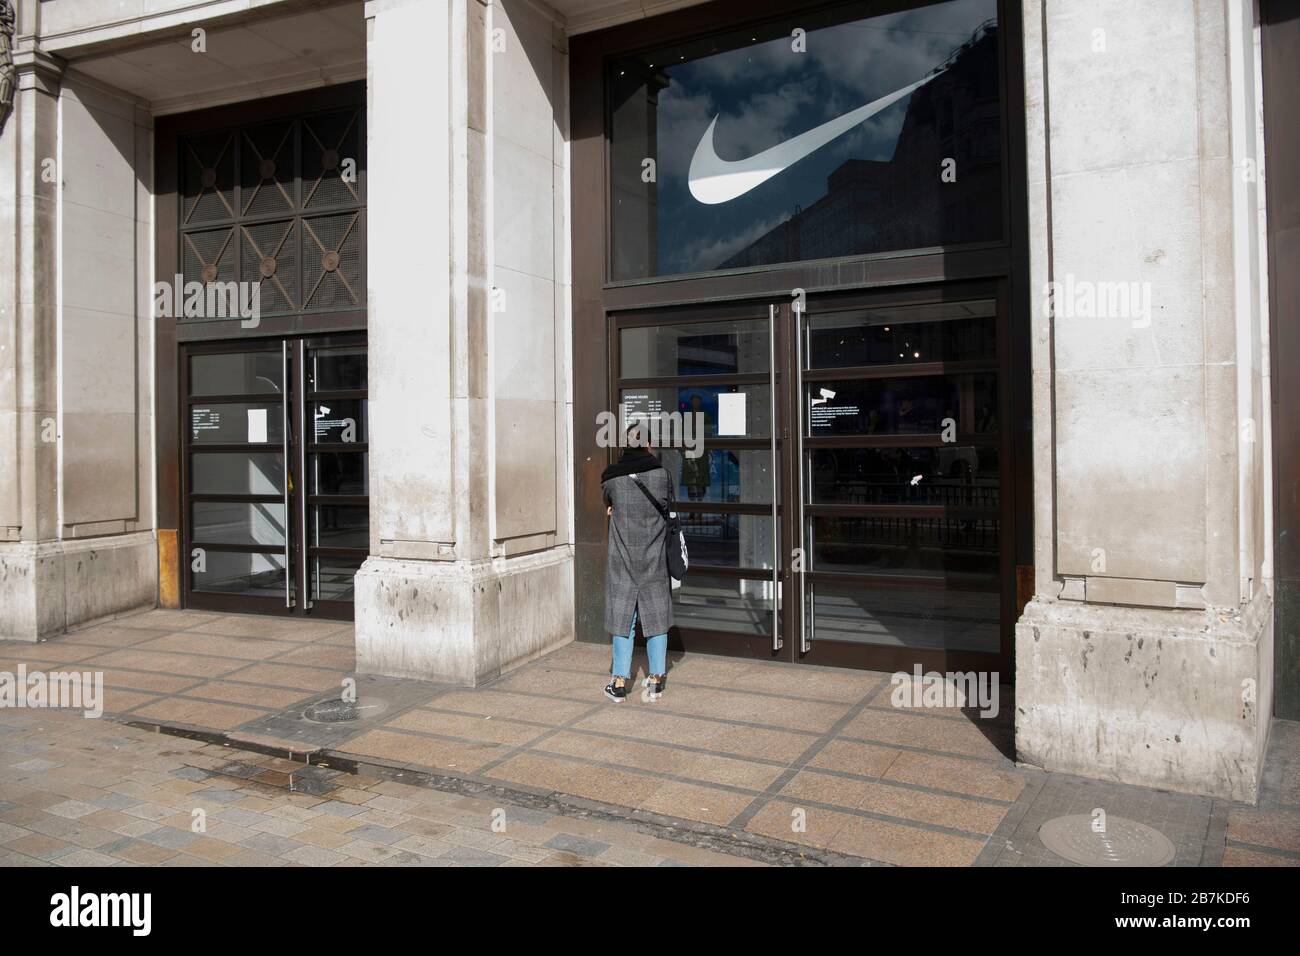 Niketown London High Resolution Stock Photography and Images - Alamy